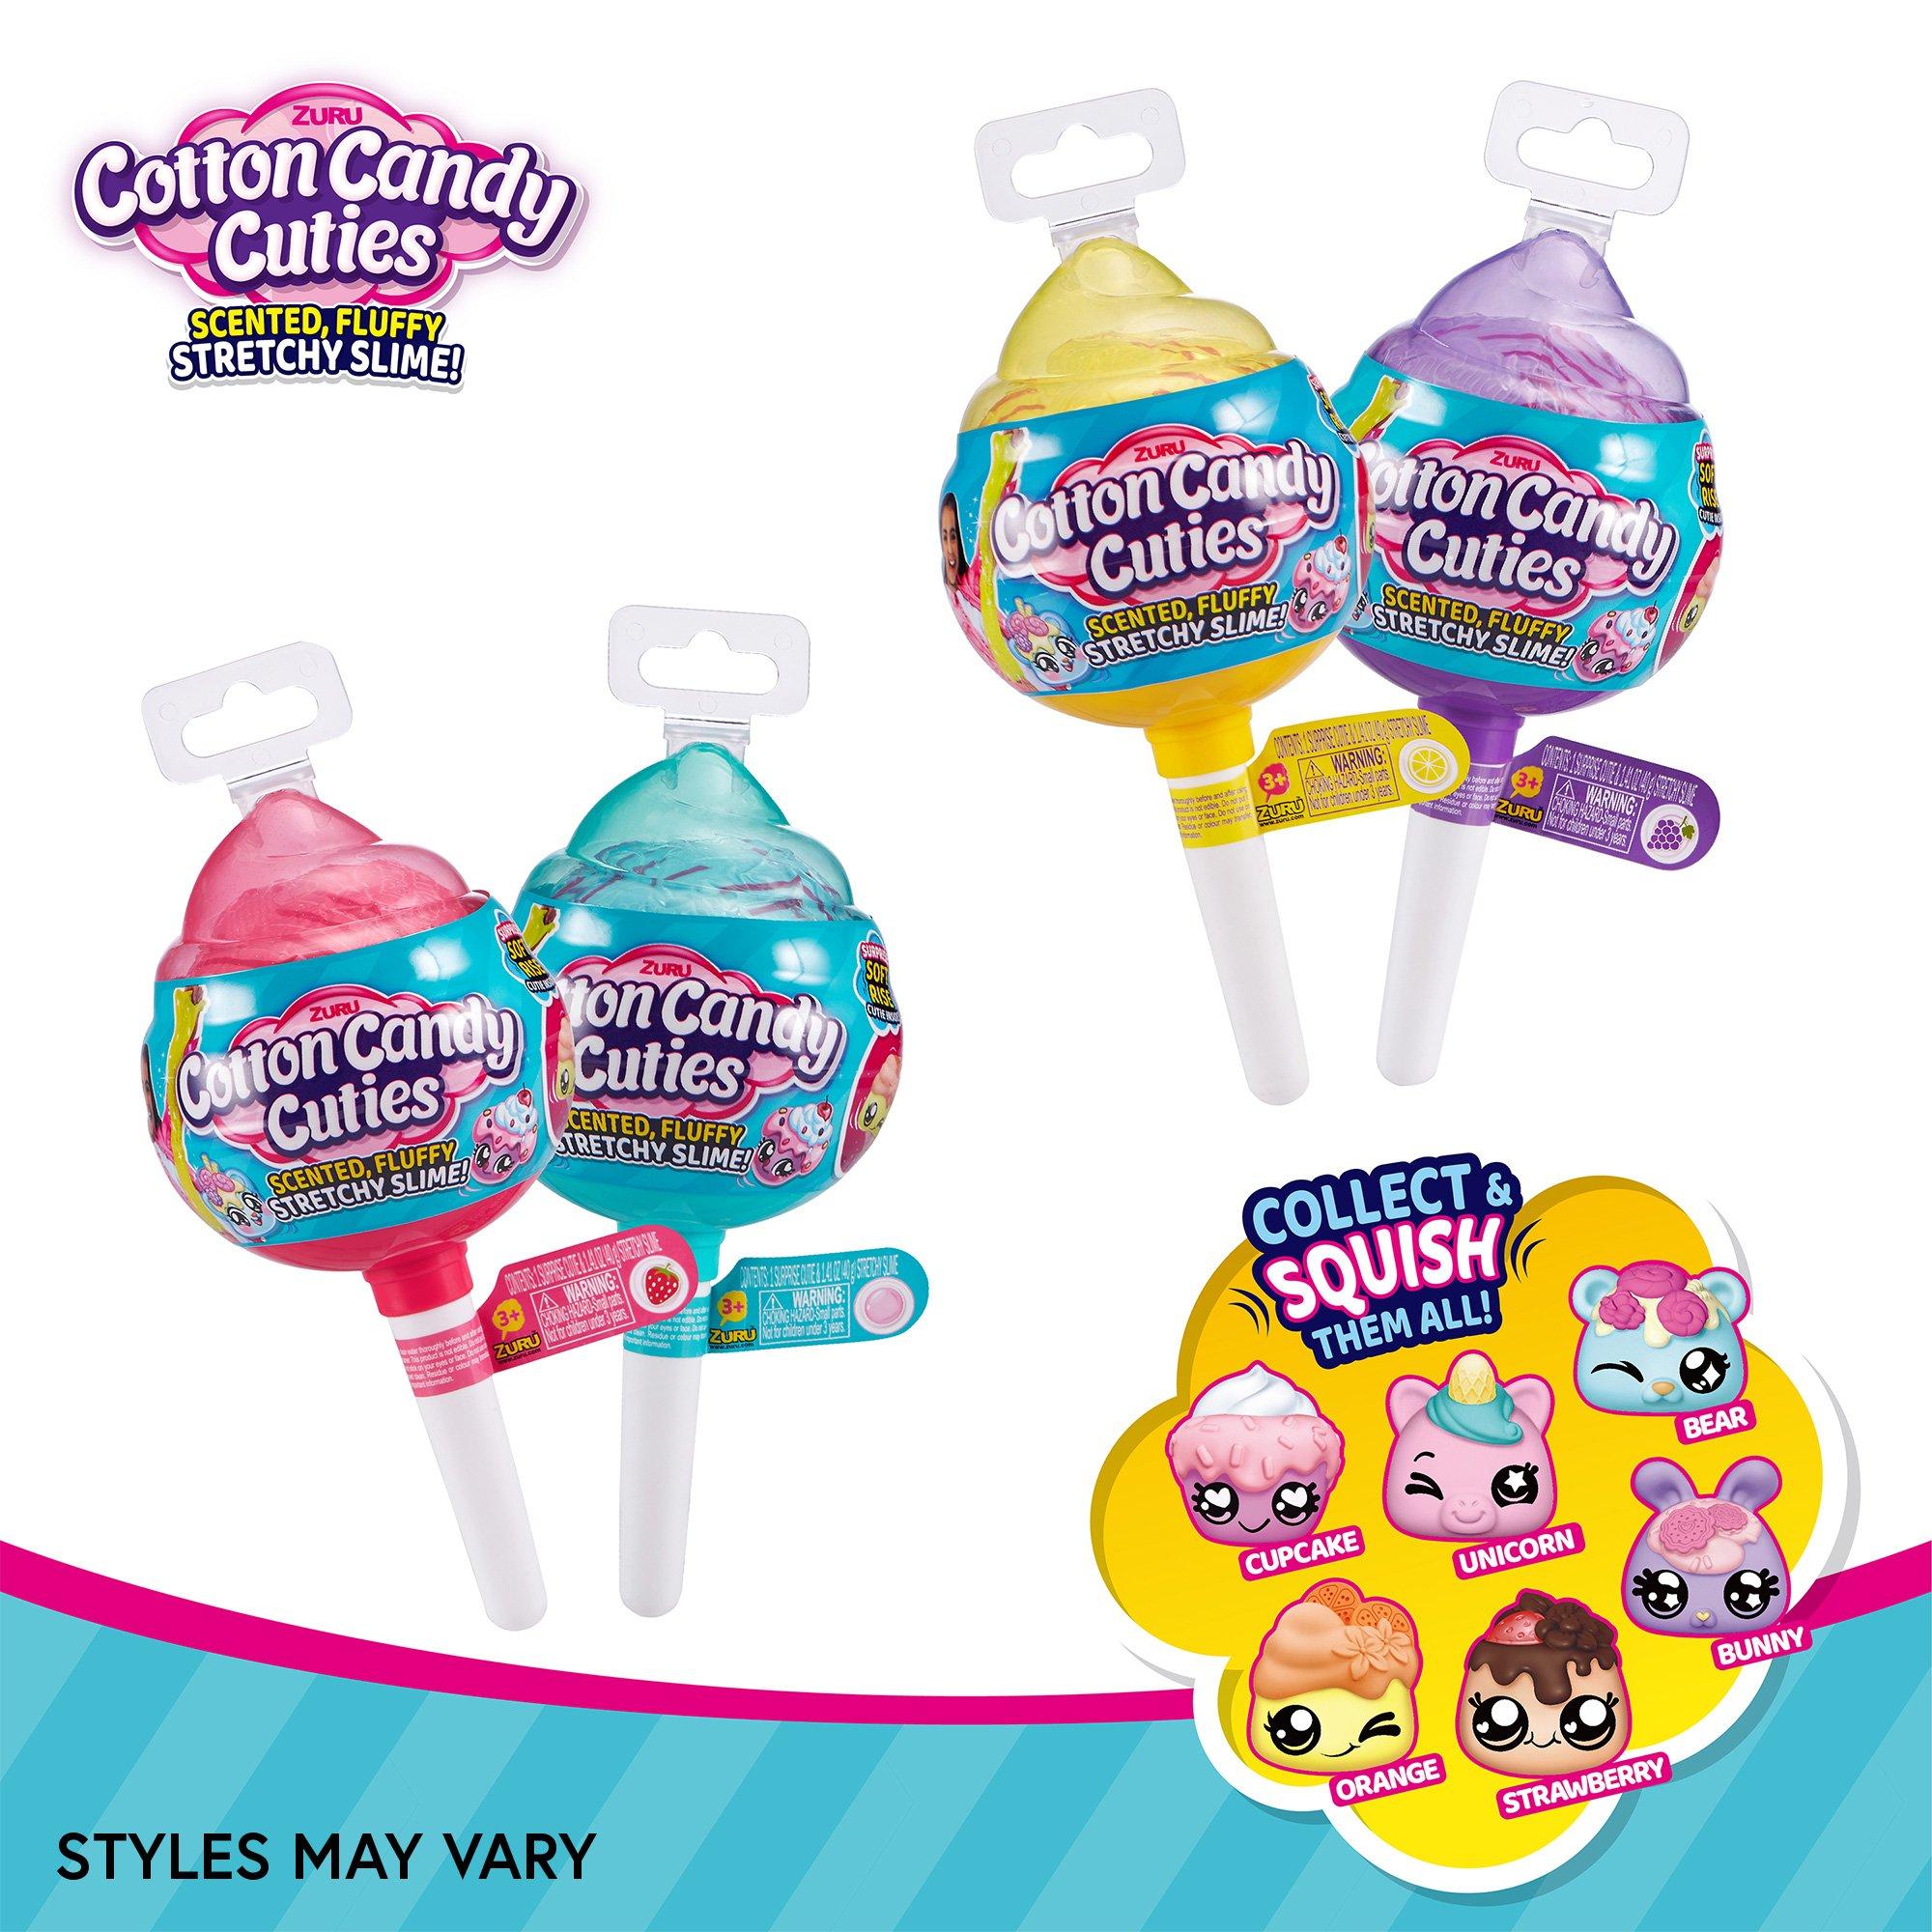 Cotton Candy Cuties with Scented Fluffy Stretchy Slime